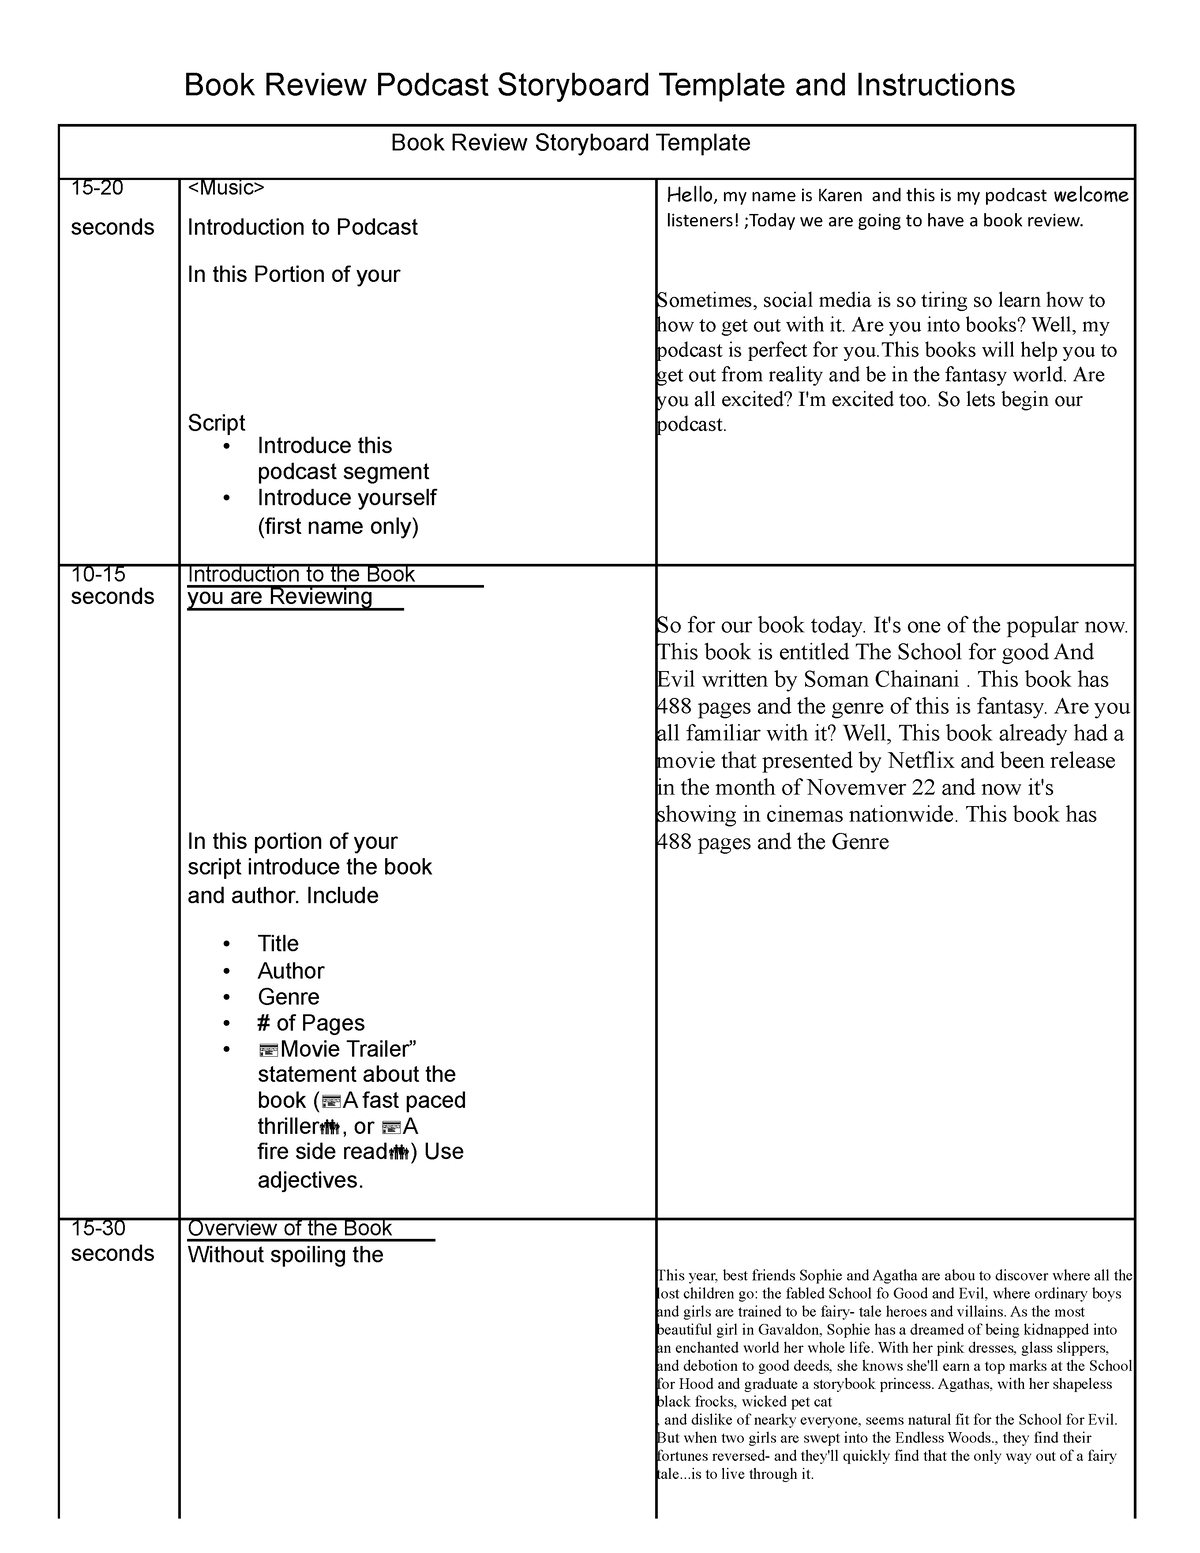 Book Review Template (podcasting) Book Review Podcast Storyboard